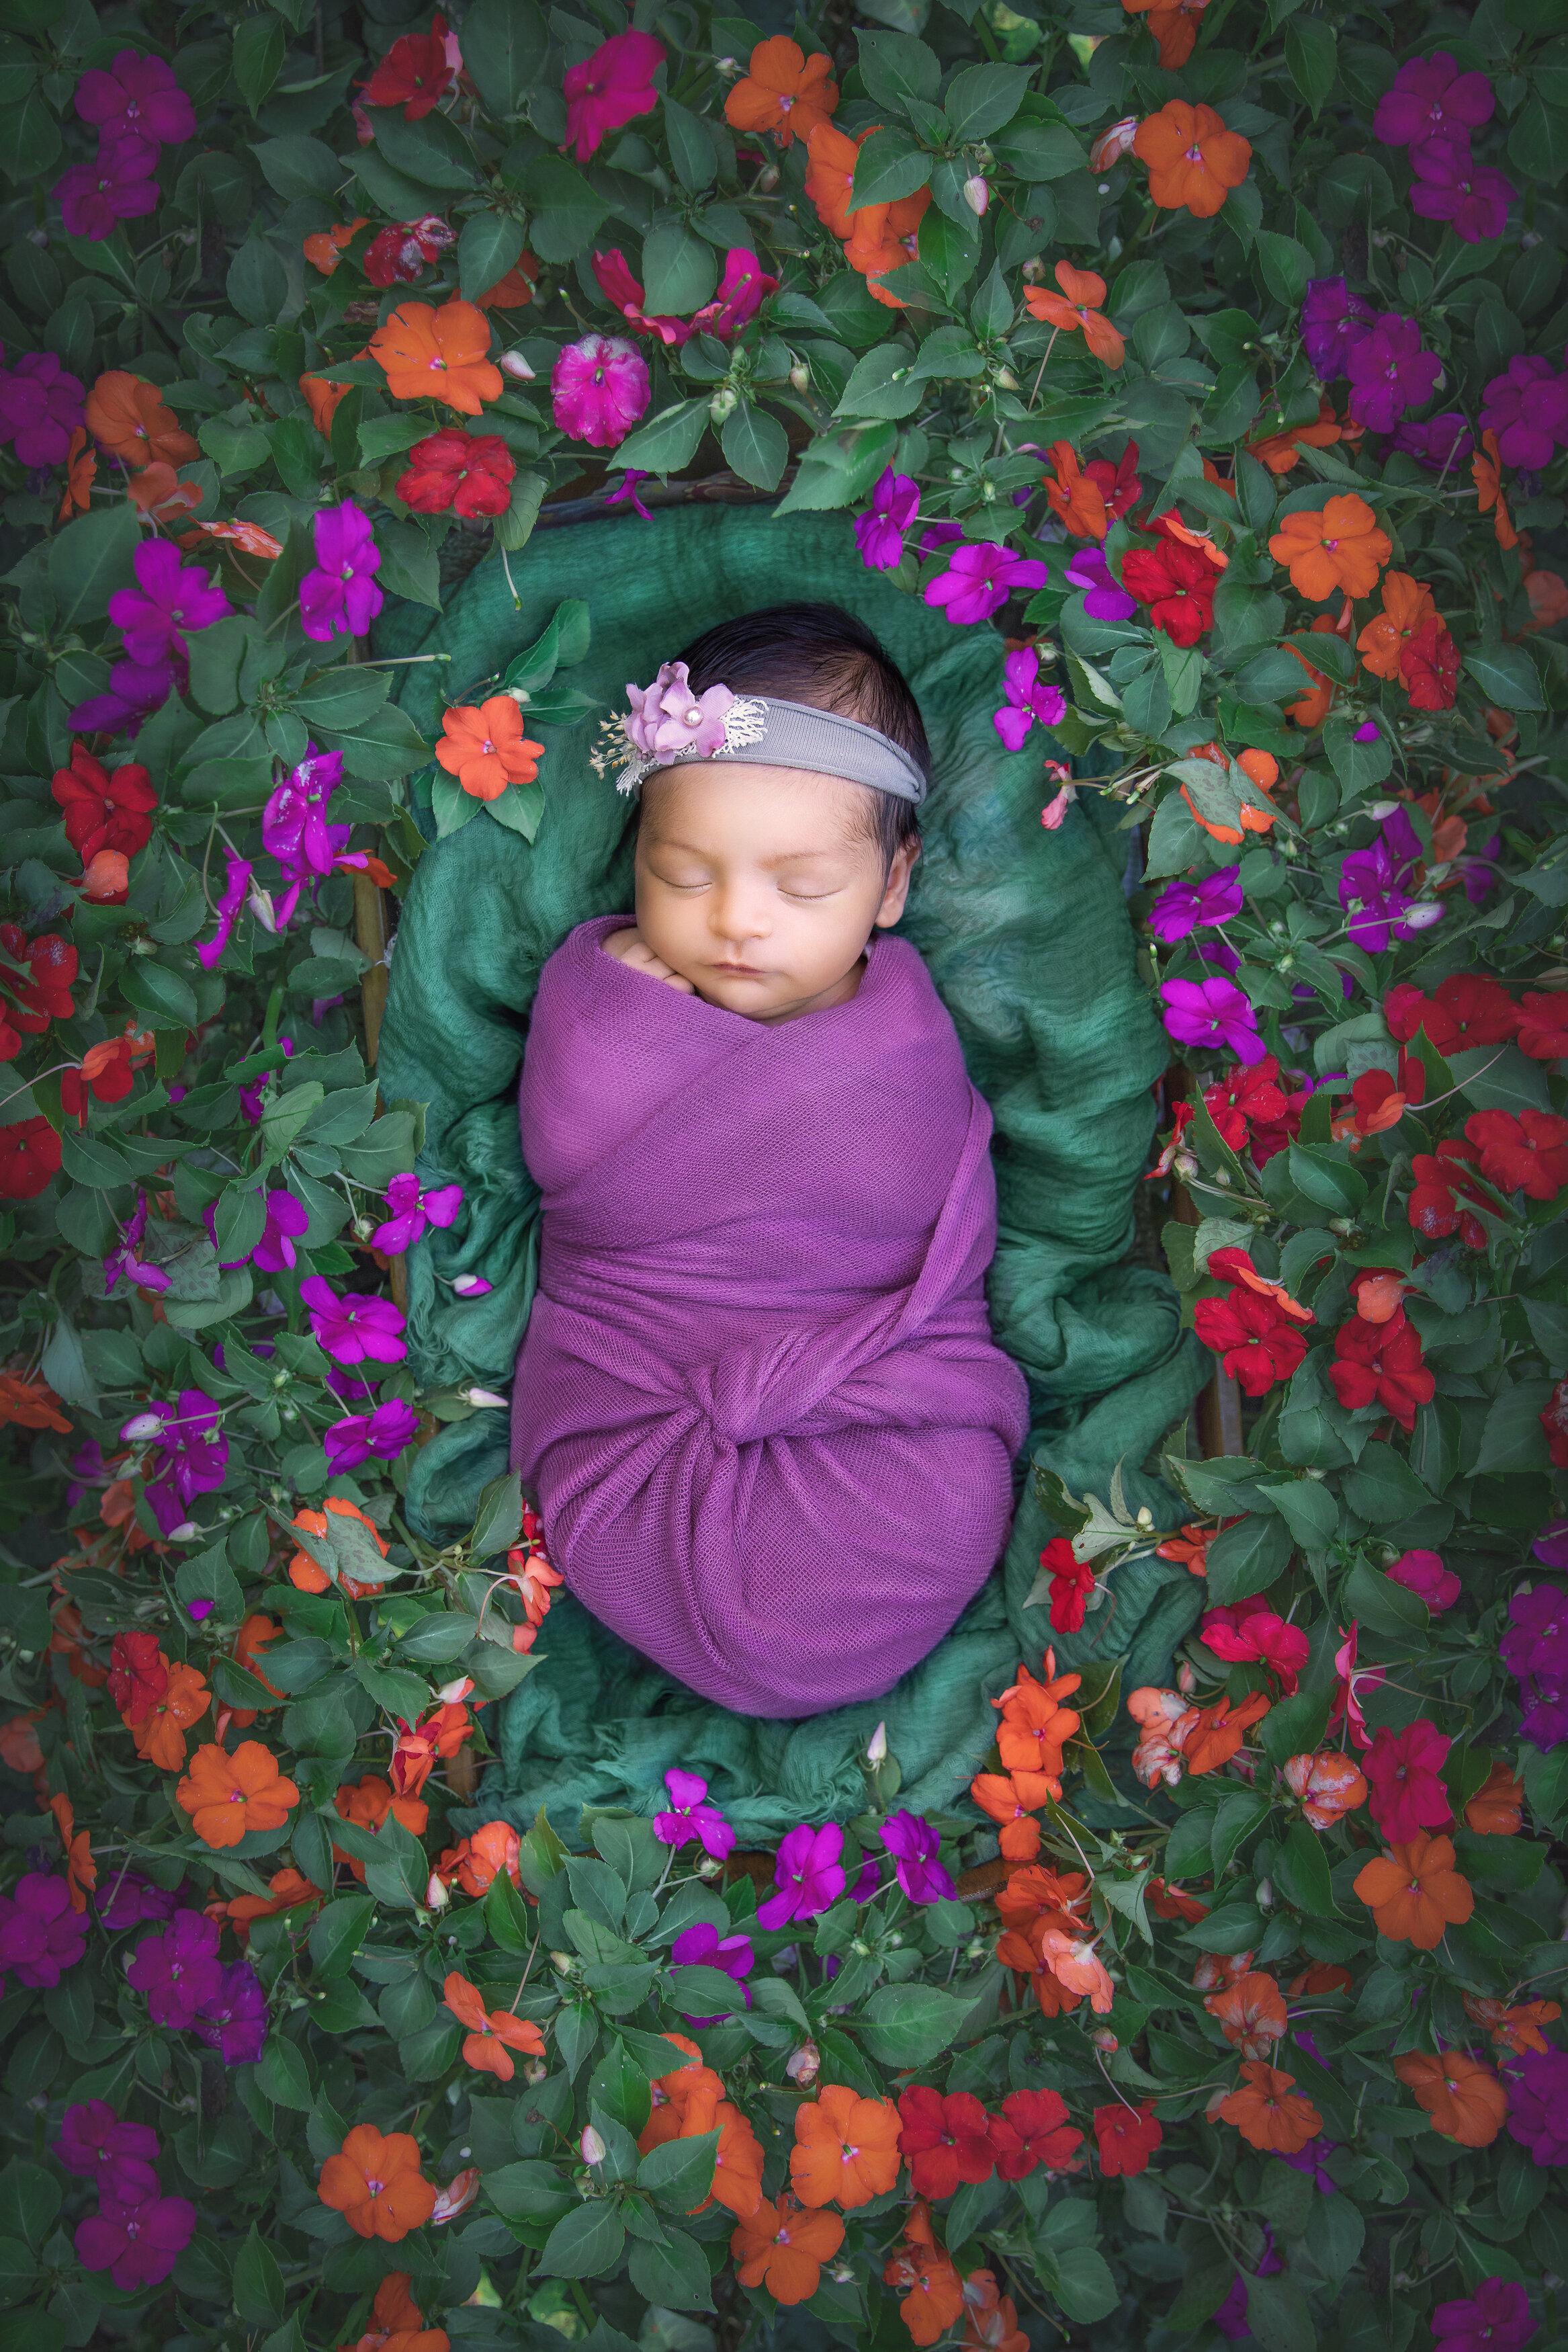 newborn  surrounded by flowers during artistic shoot with new jersey baby photographer.